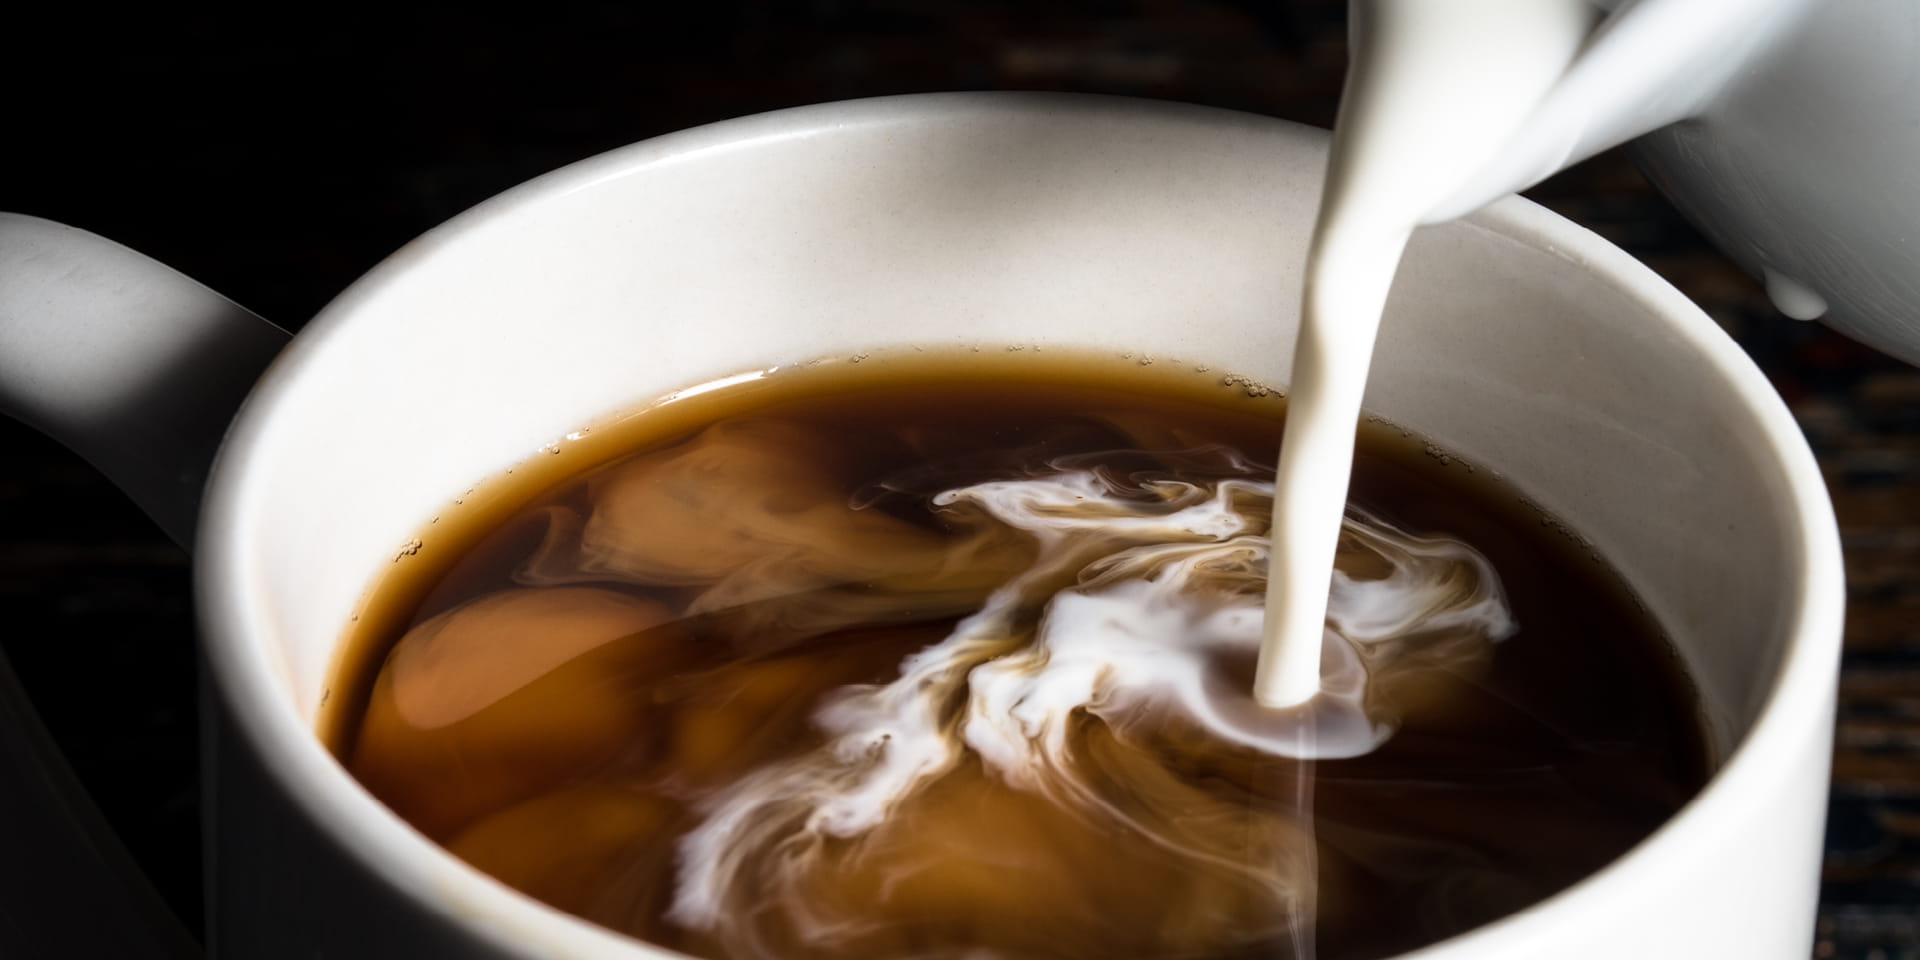 Cream being poured into a coffee cup